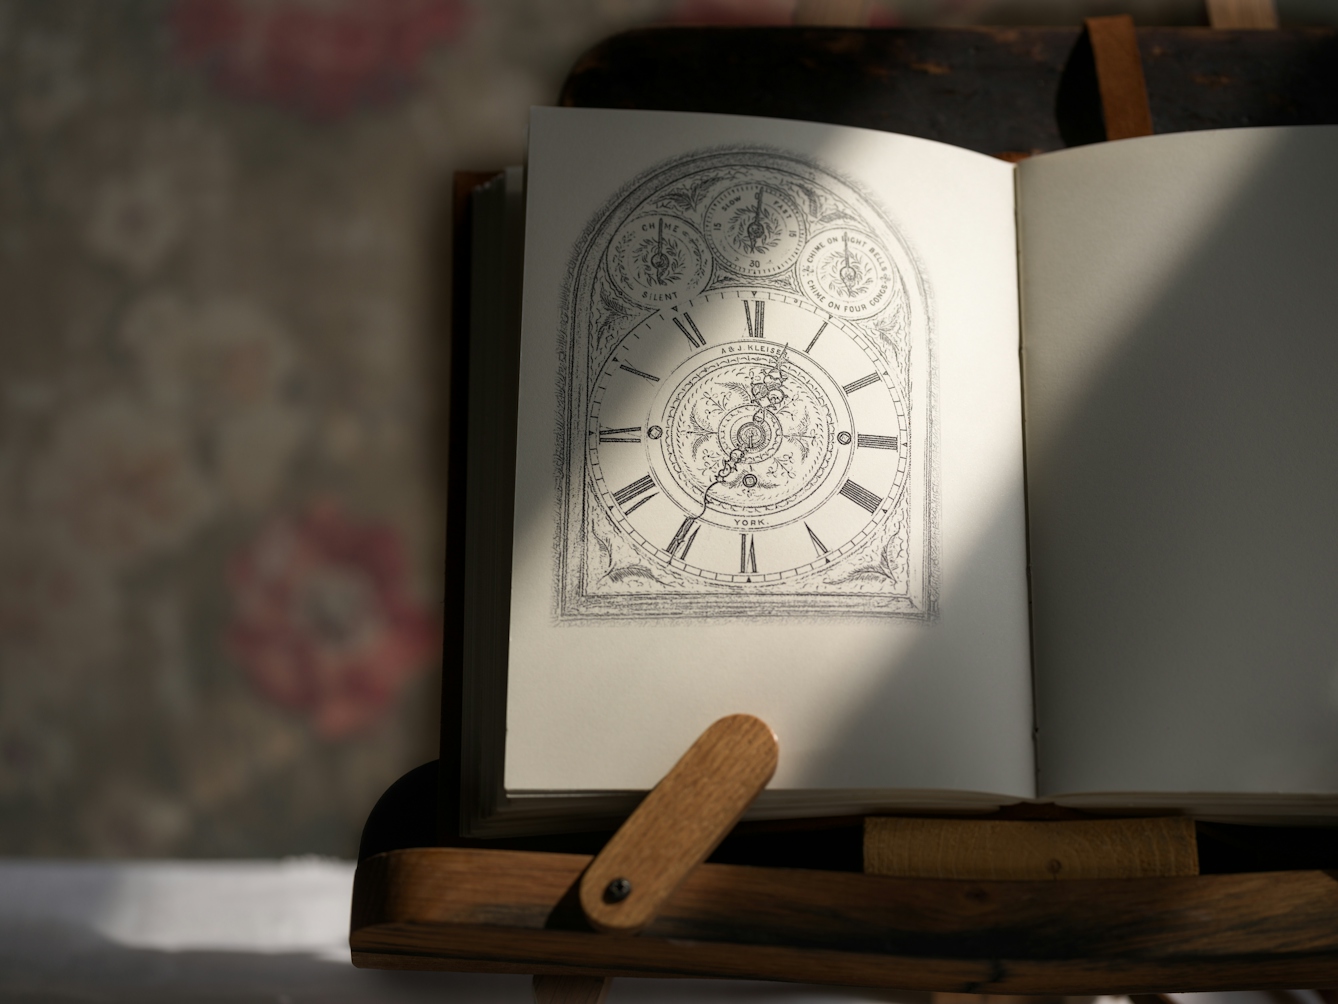 Photograph of a notebook on a wooden book stand, lit by a window from the right, casting a shadow on half of the page. On the left page there is a sketch of a clock.